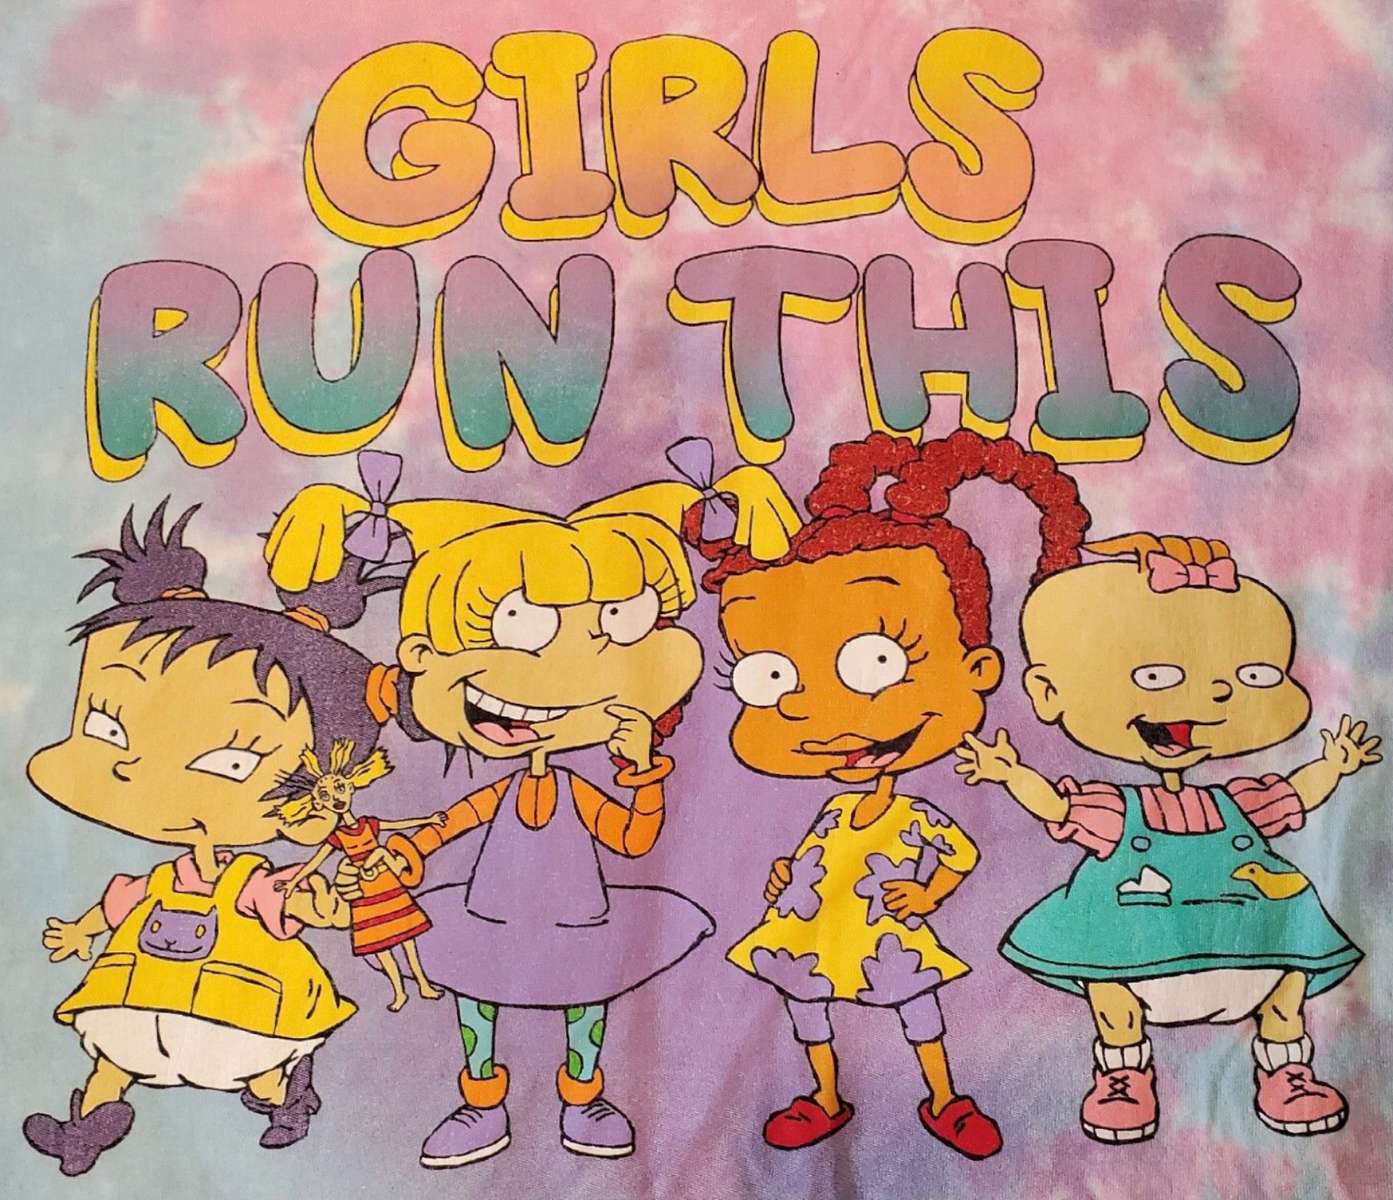 Rugrats - Girls Run This❤️❤️❤️❤️❤️❤️ puzzle online